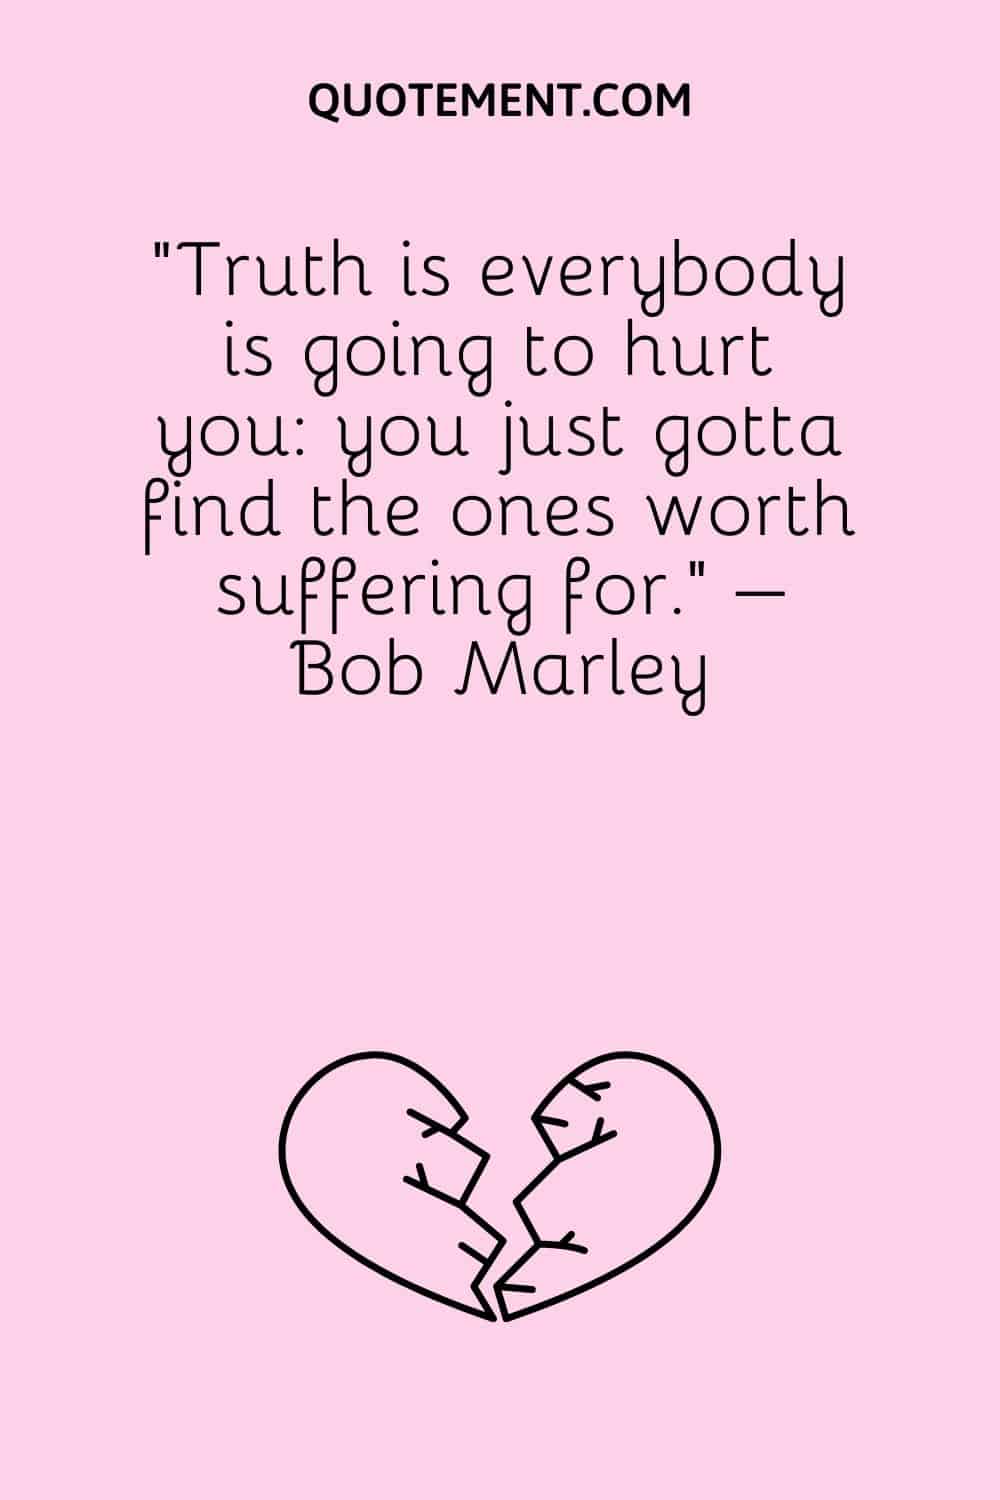 “Truth is everybody is going to hurt you you just gotta find the ones worth suffering for.” – Bob Marley